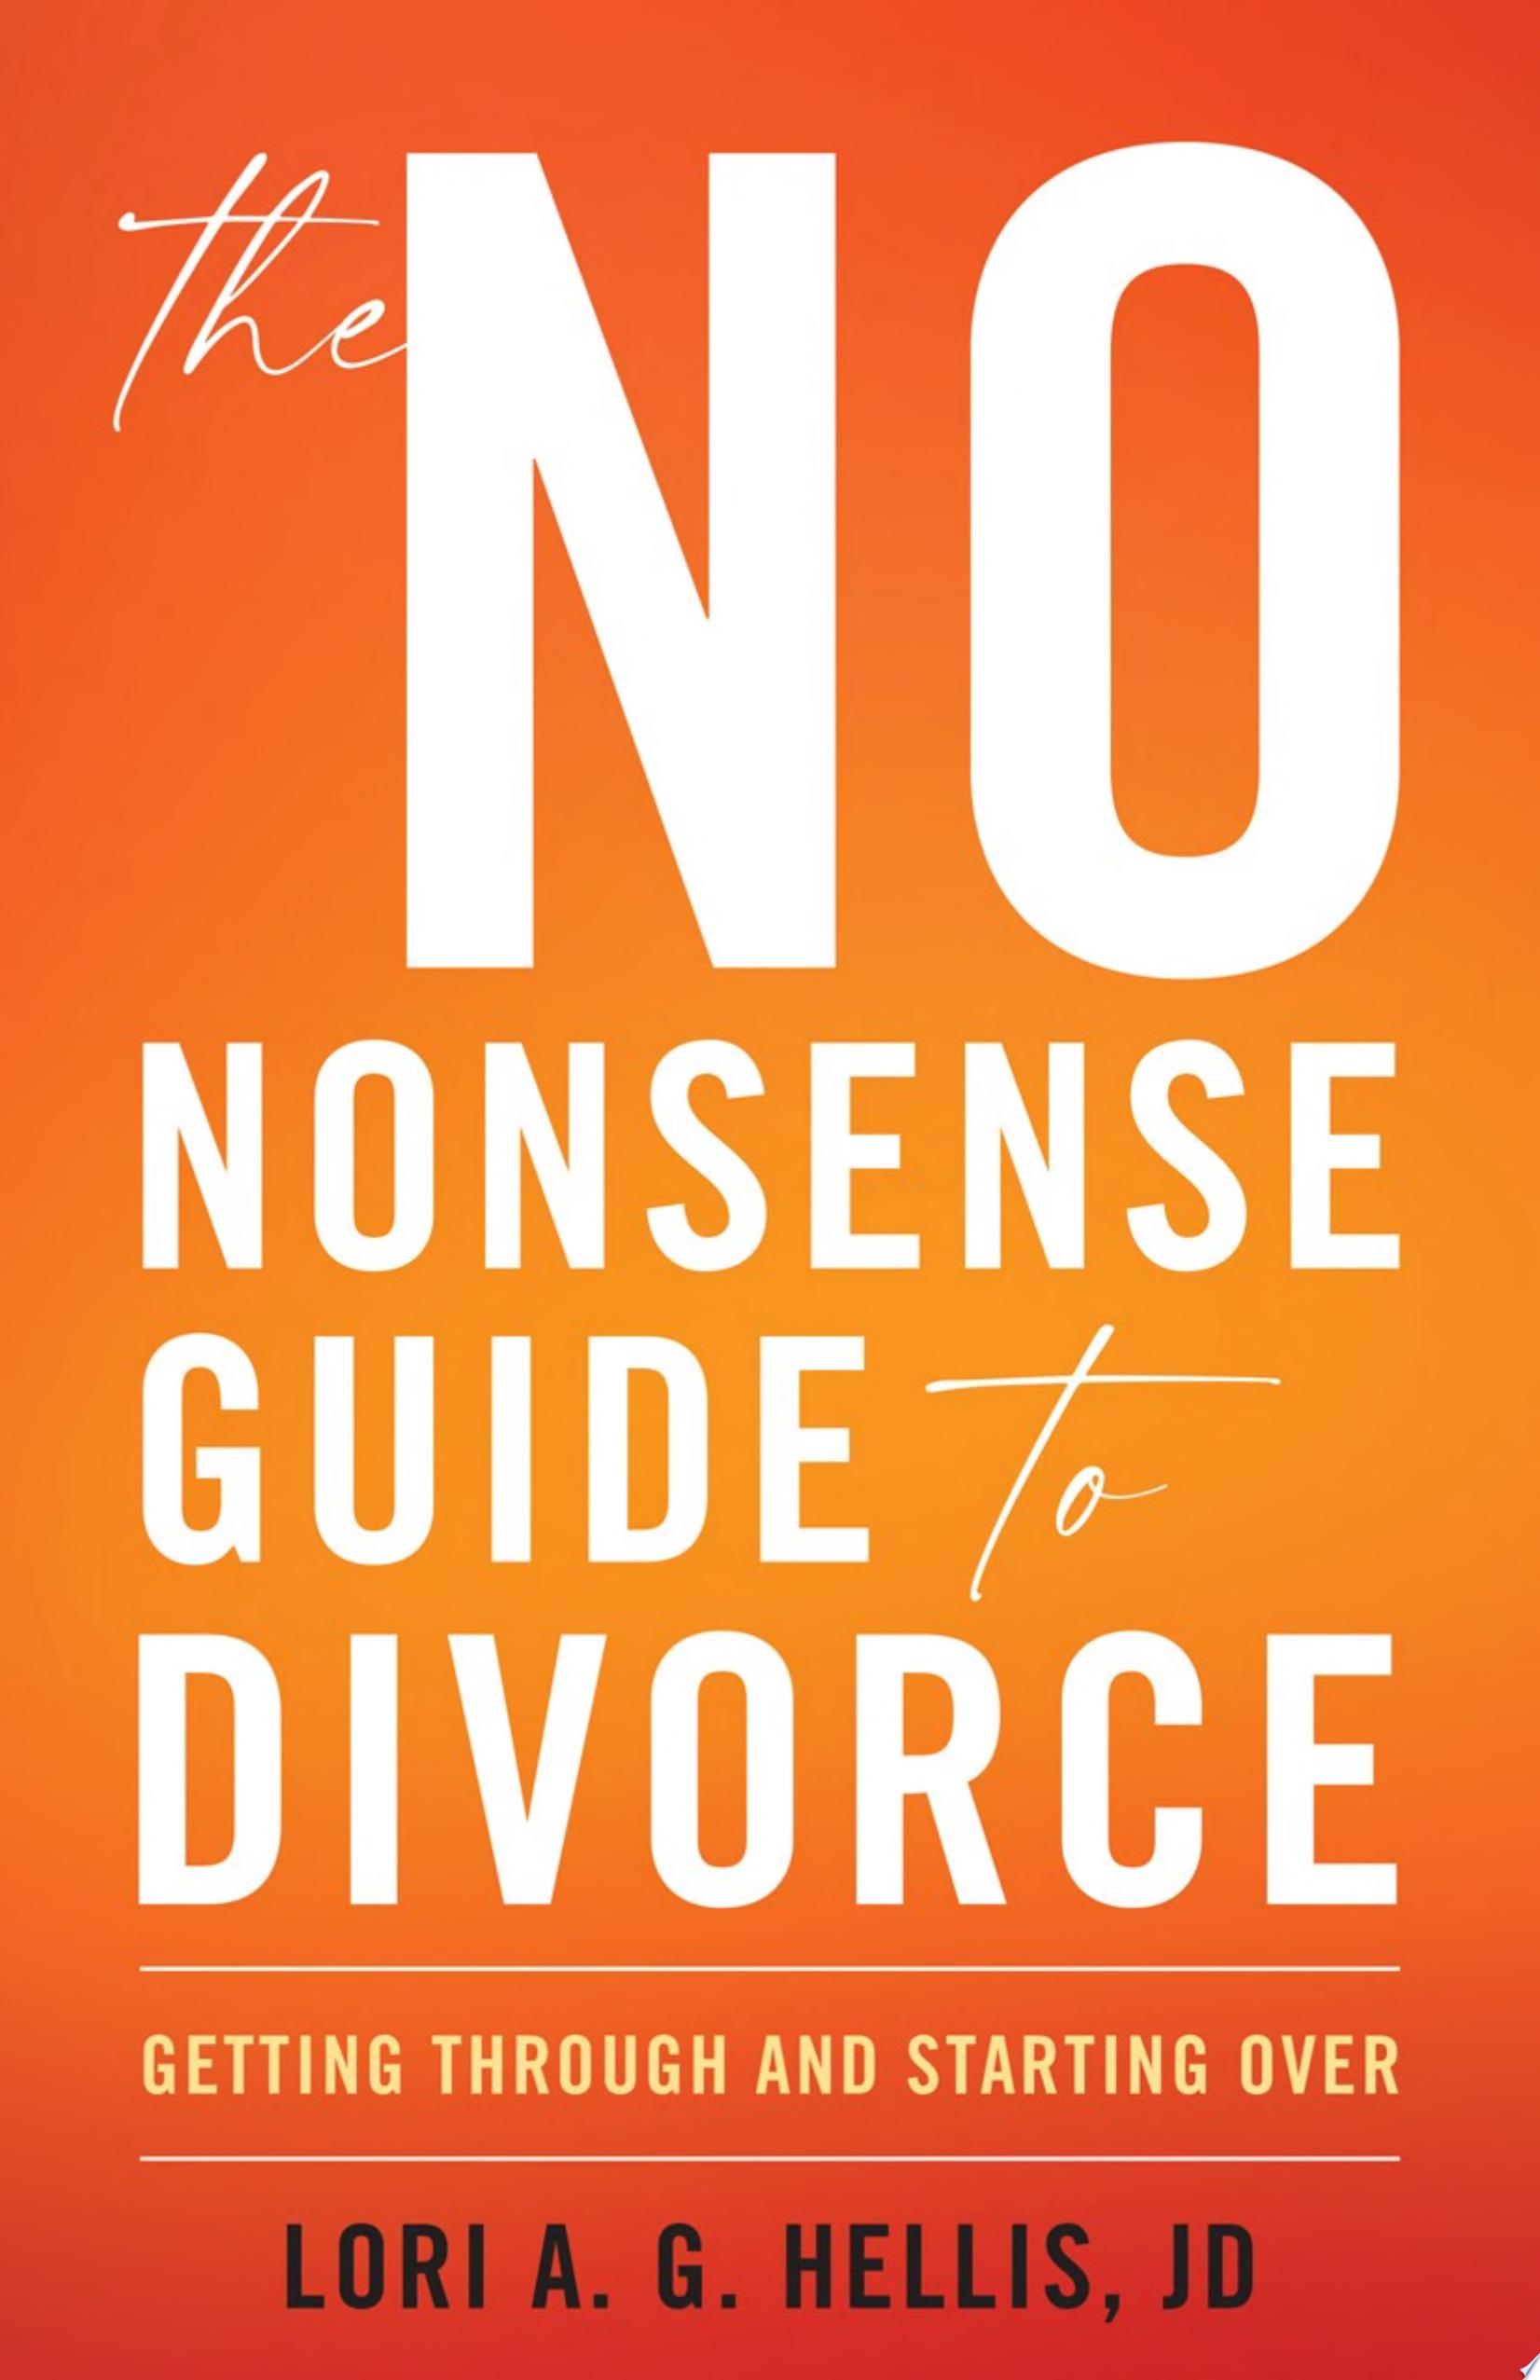 Image for "The No-Nonsense Guide to Divorce"